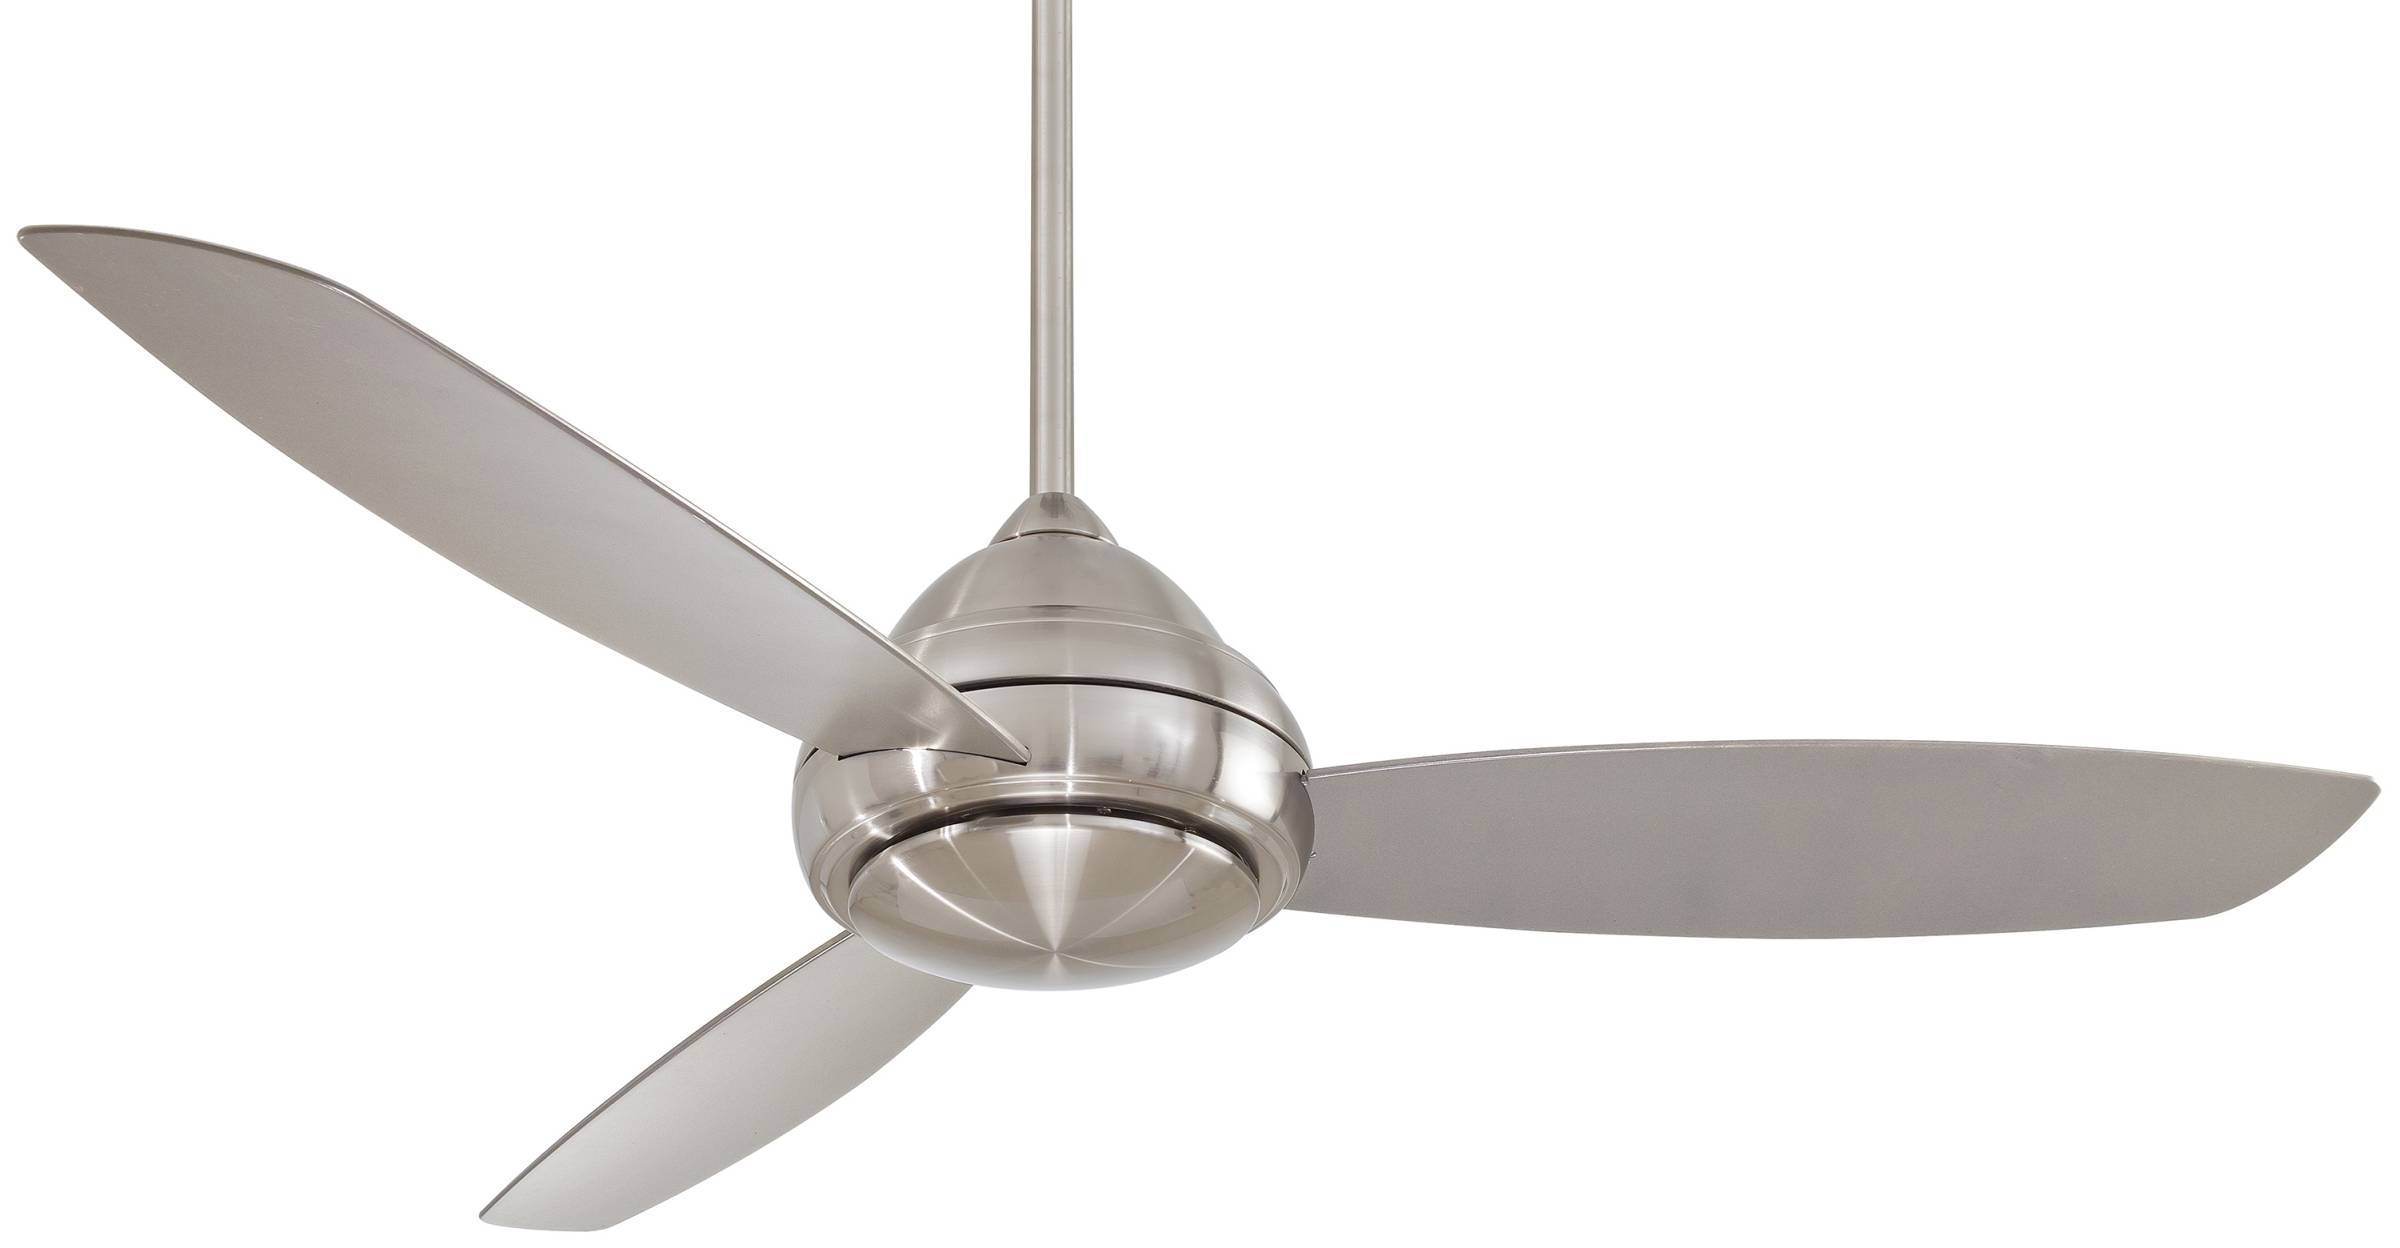 Stainless Steel Ceiling Fan Without Lightsstainless steel ceiling fans without lights winda 7 furniture